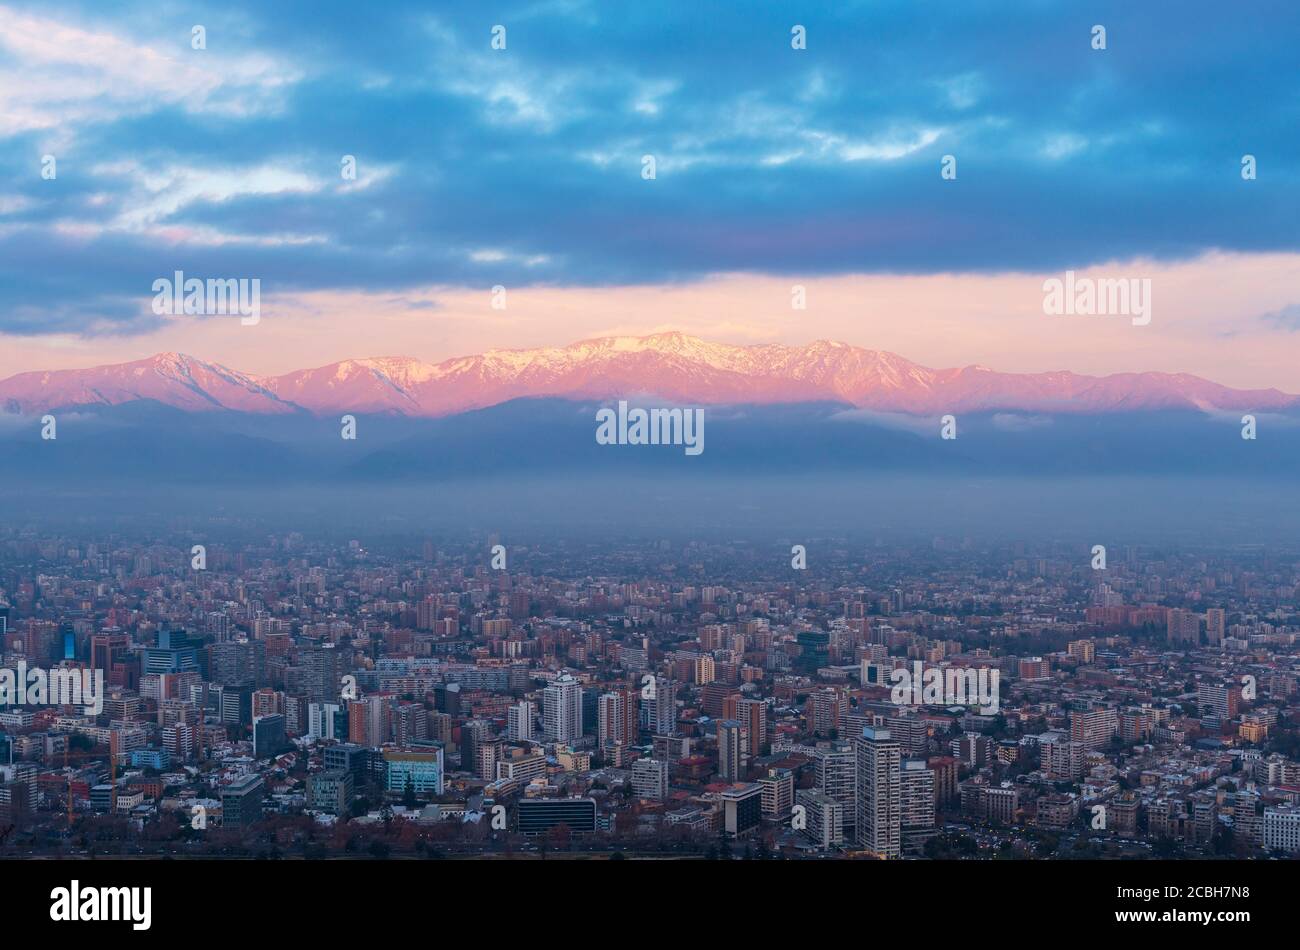 Skyline of Santiago de Chile at sunset with the illuminated Andes mountains, Chile. Stock Photo